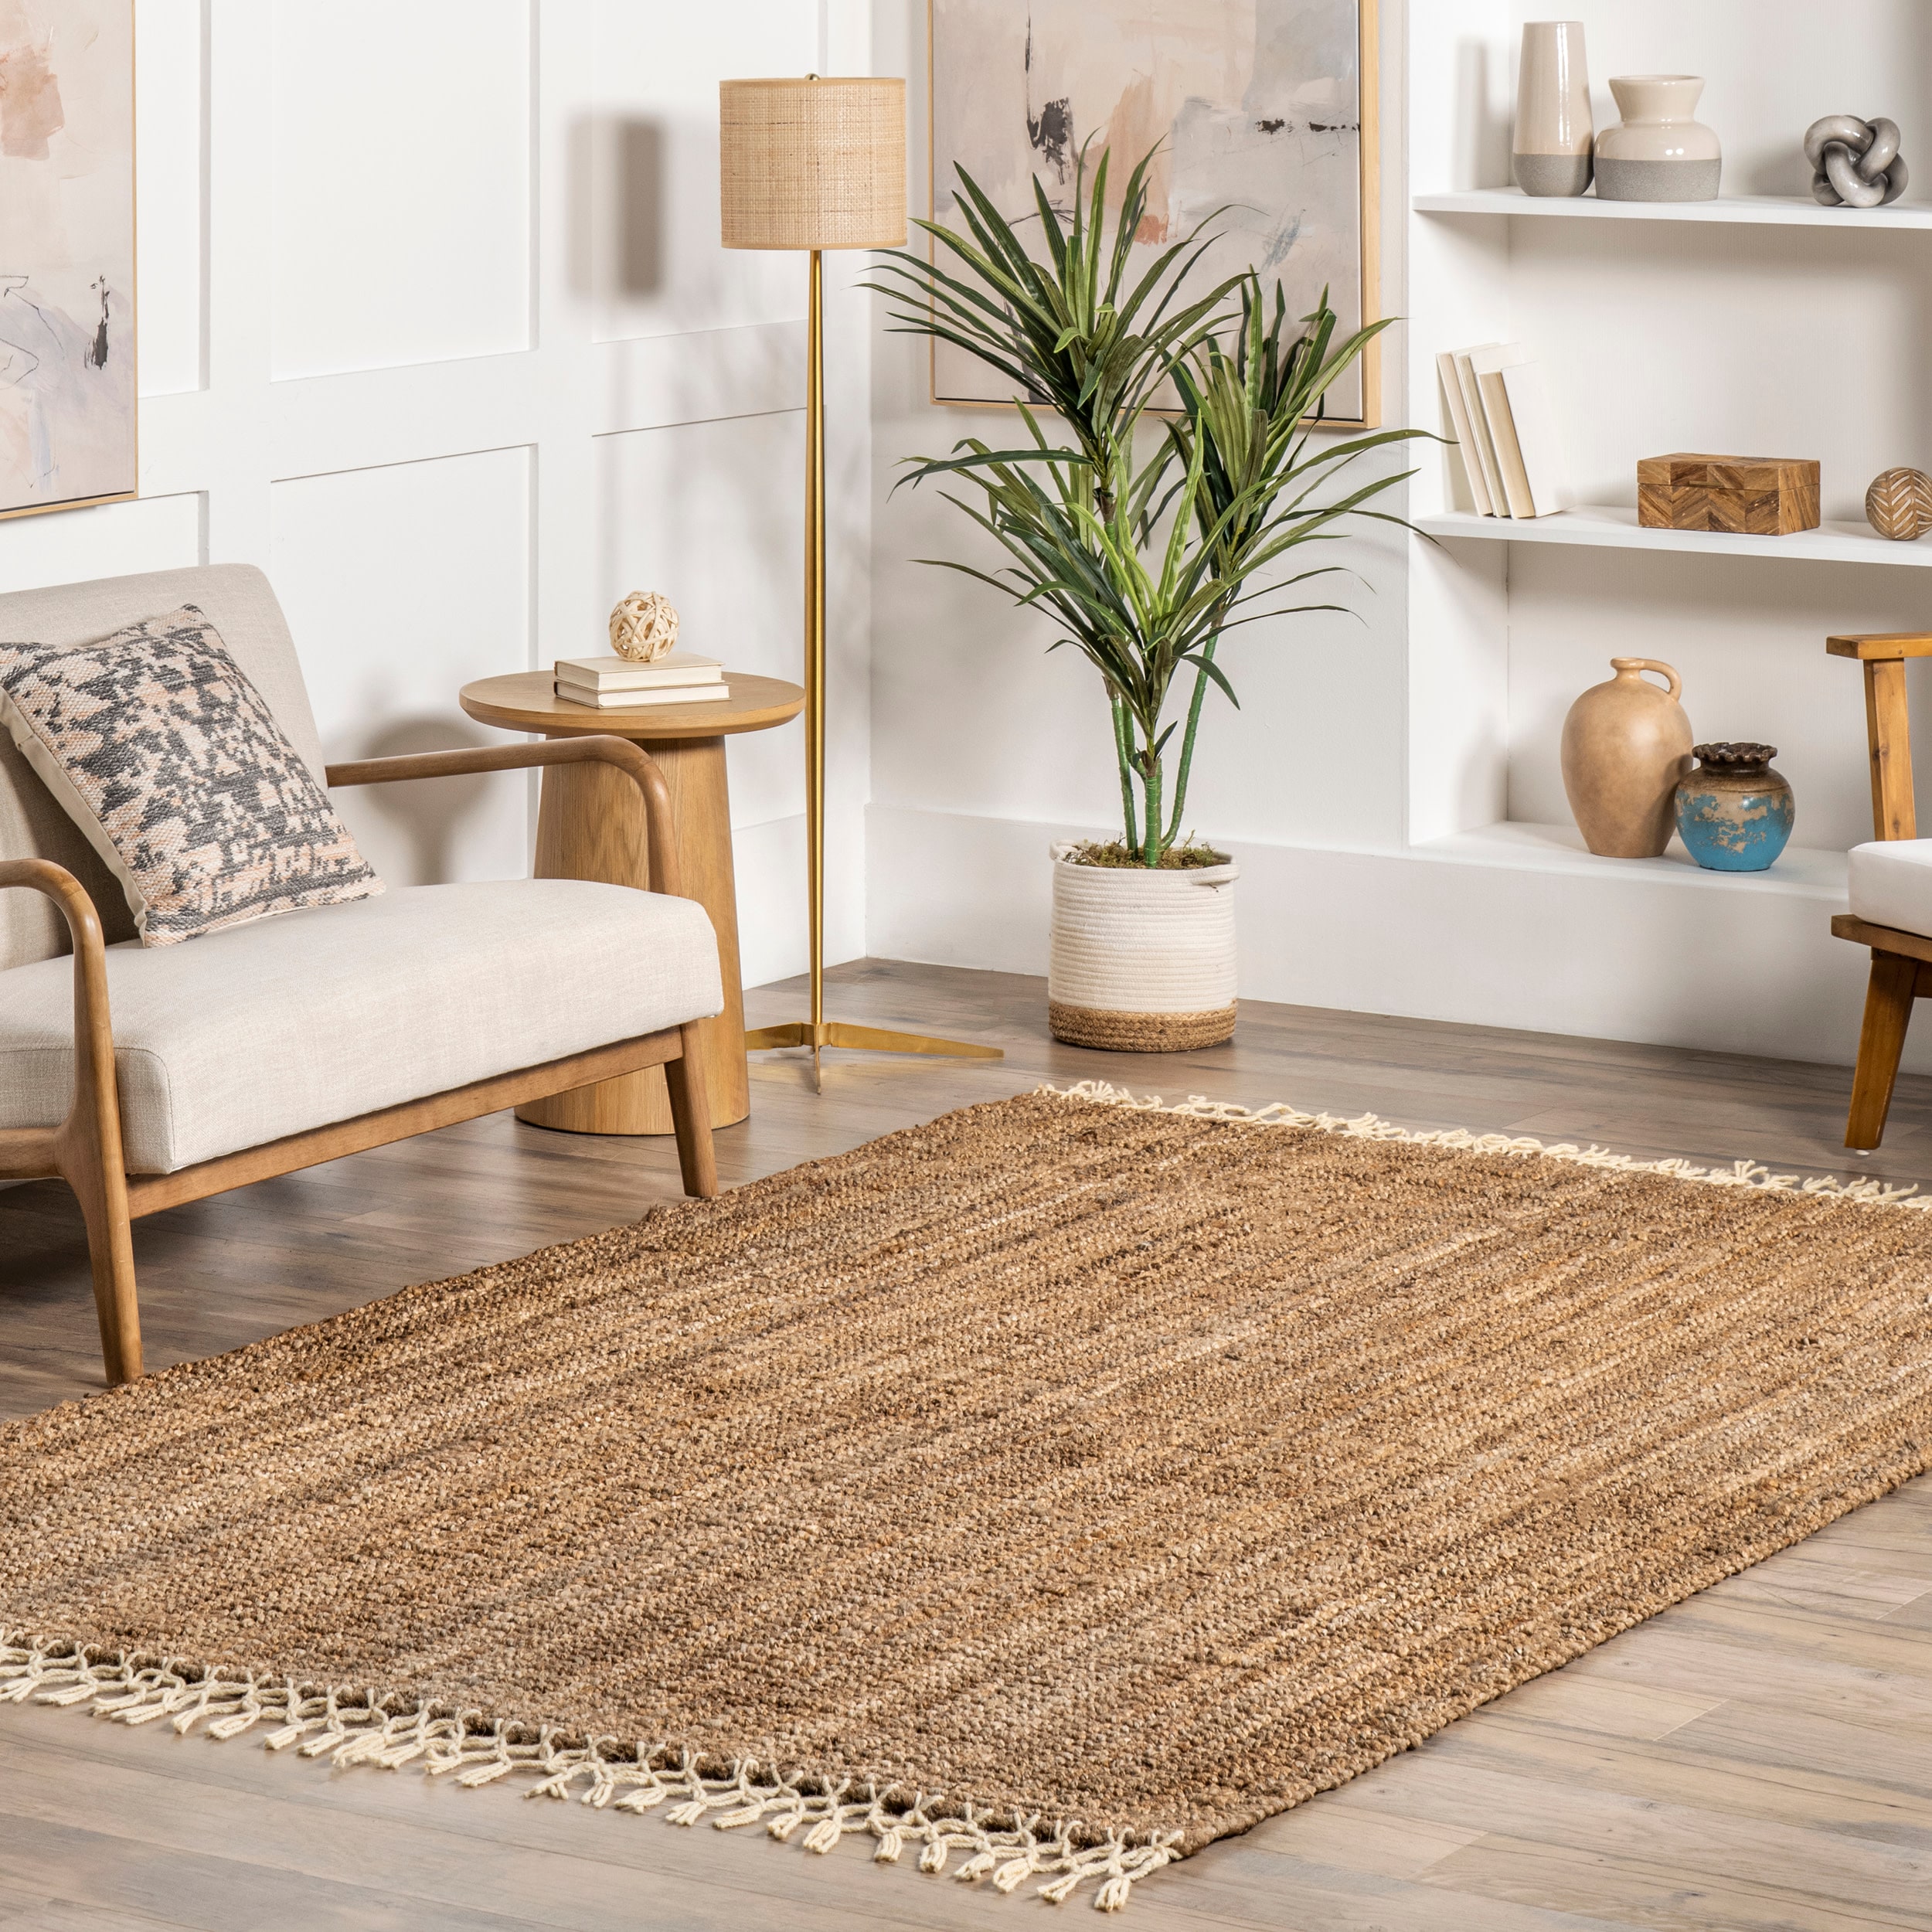 Country Style Braided Jute Rugs - Harbor